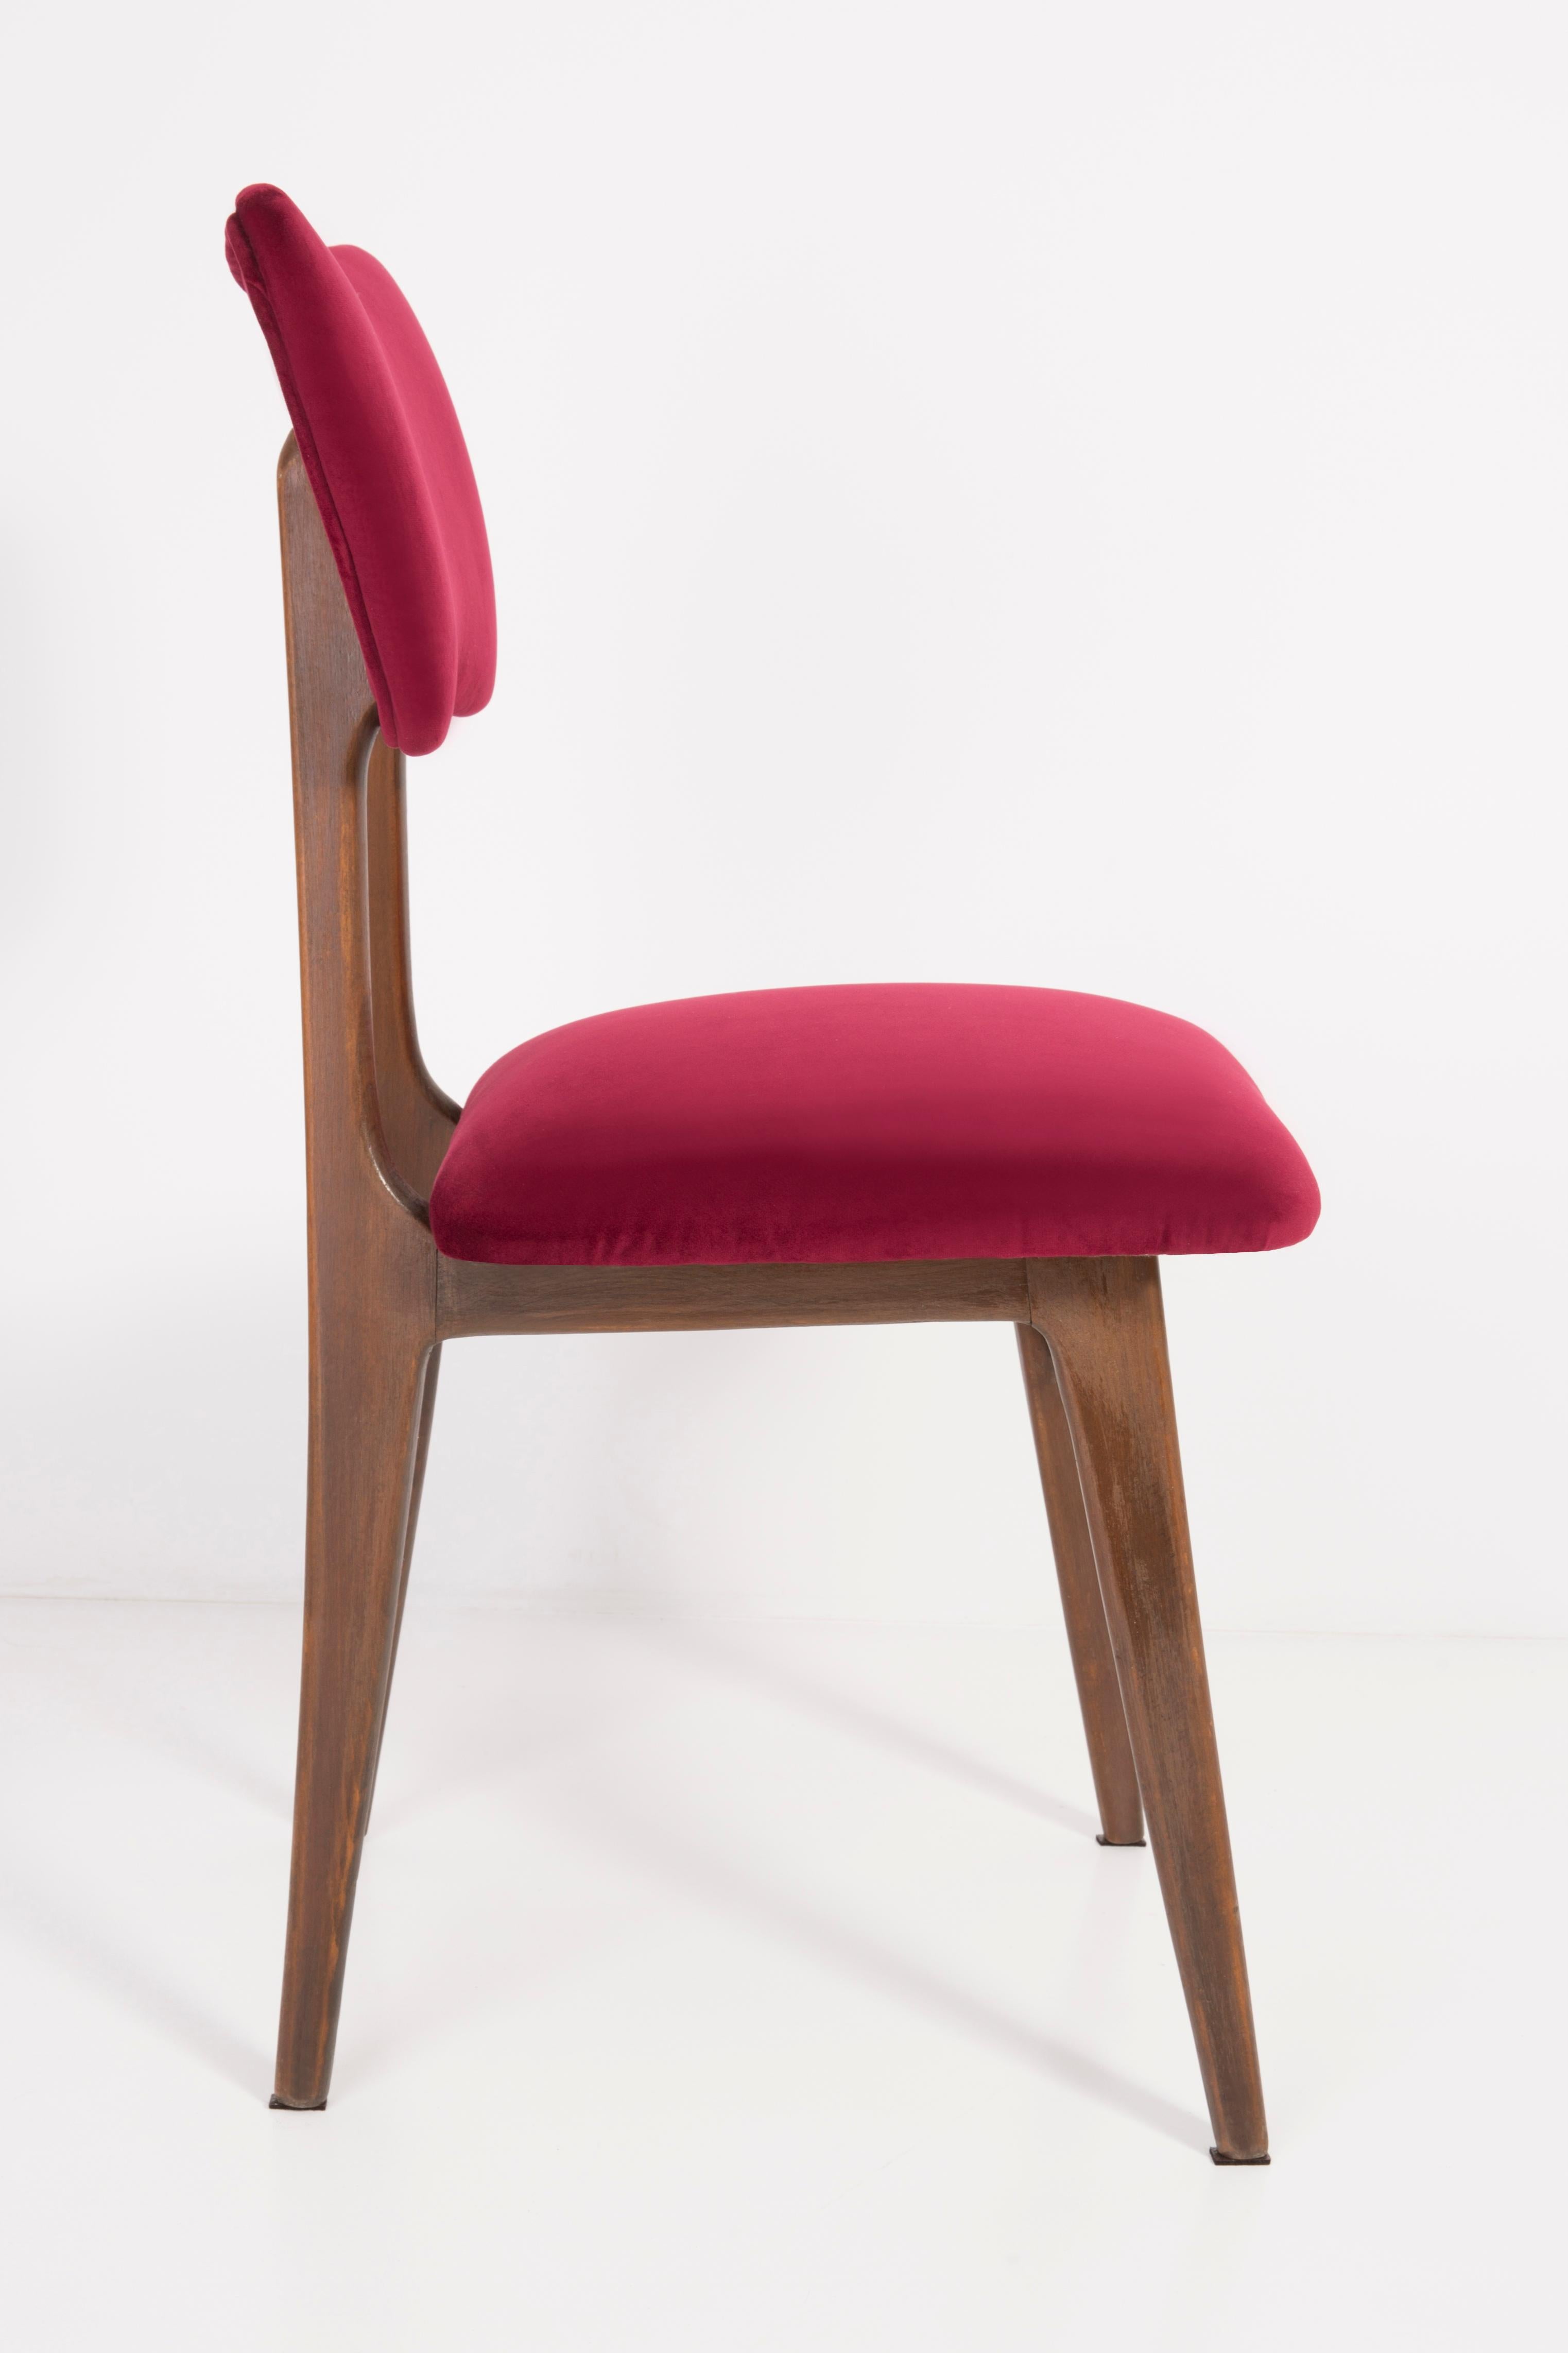 Set of Twelve 20th Century Burgundy Red Chairs, 1960s For Sale 4